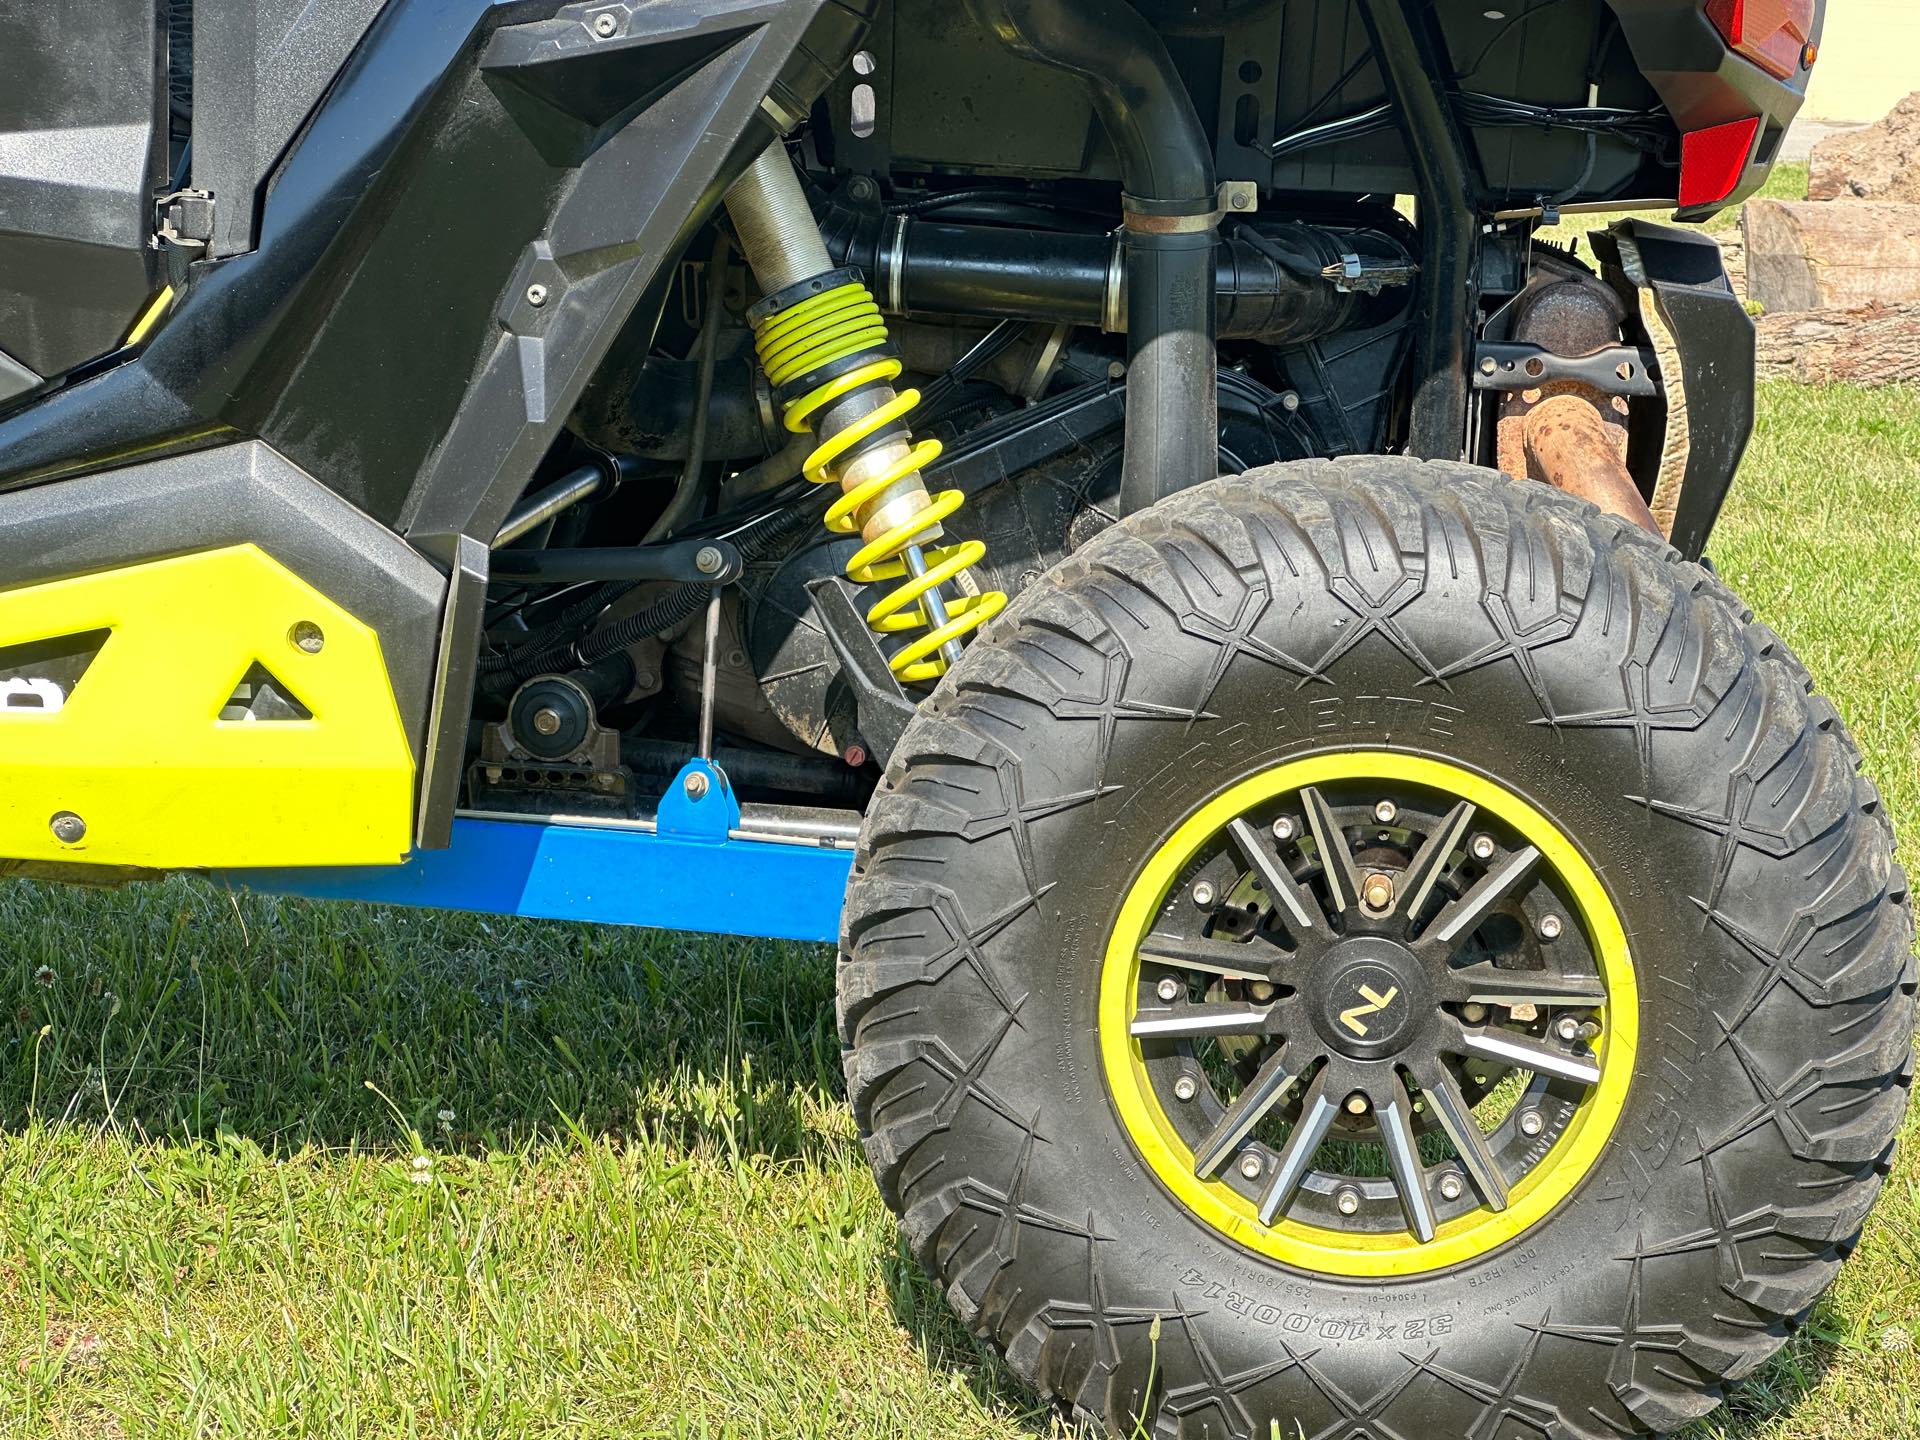 2017 Polaris RZR XP 1000 EPS Velocity Blue LE at ATVs and More